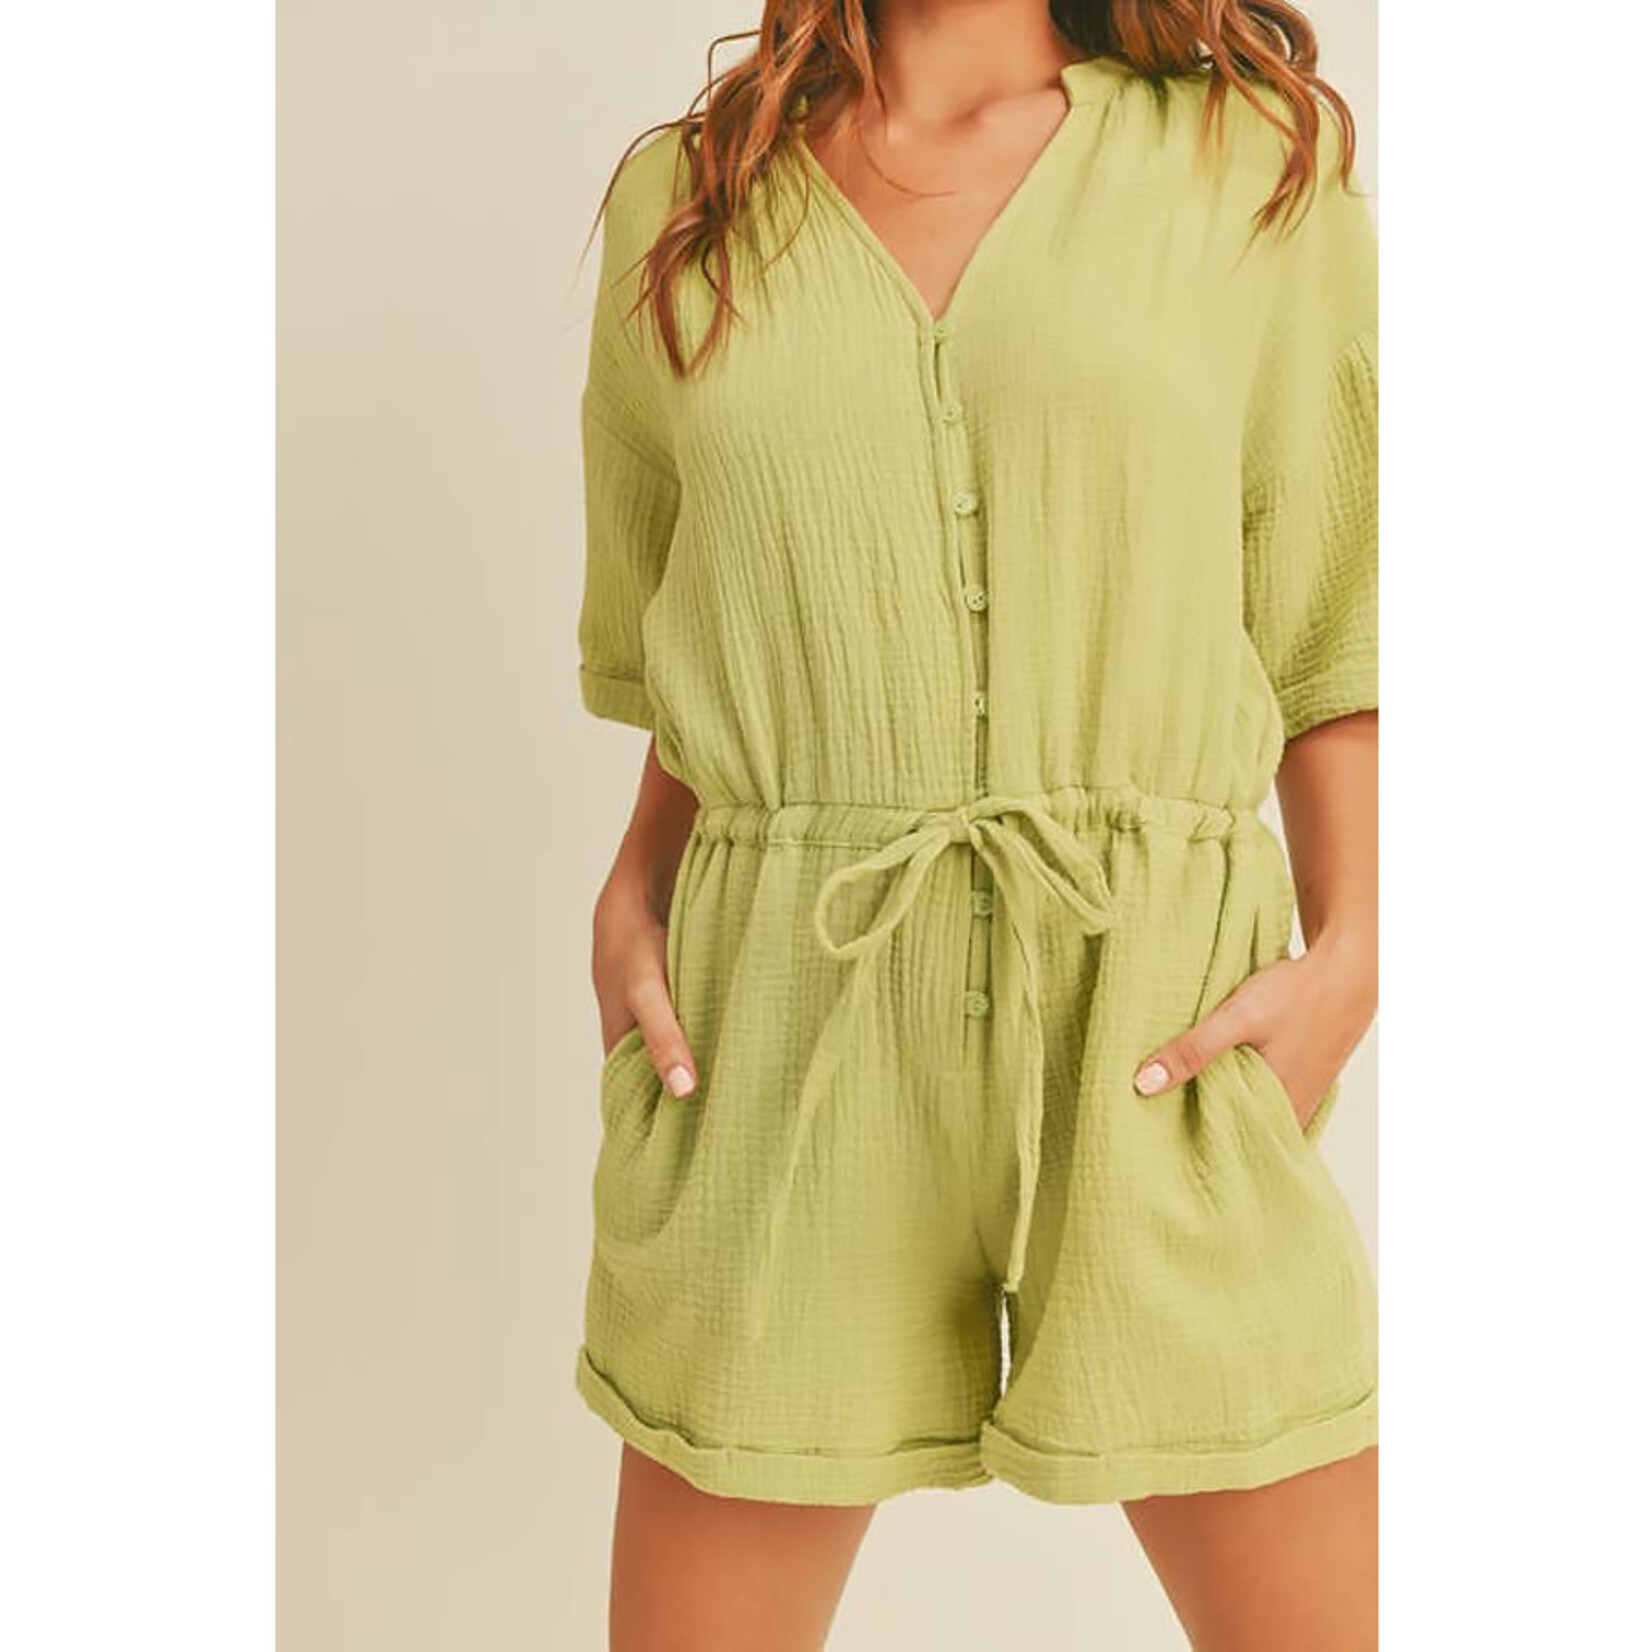 LUSH Breeze on By Button Front Romper